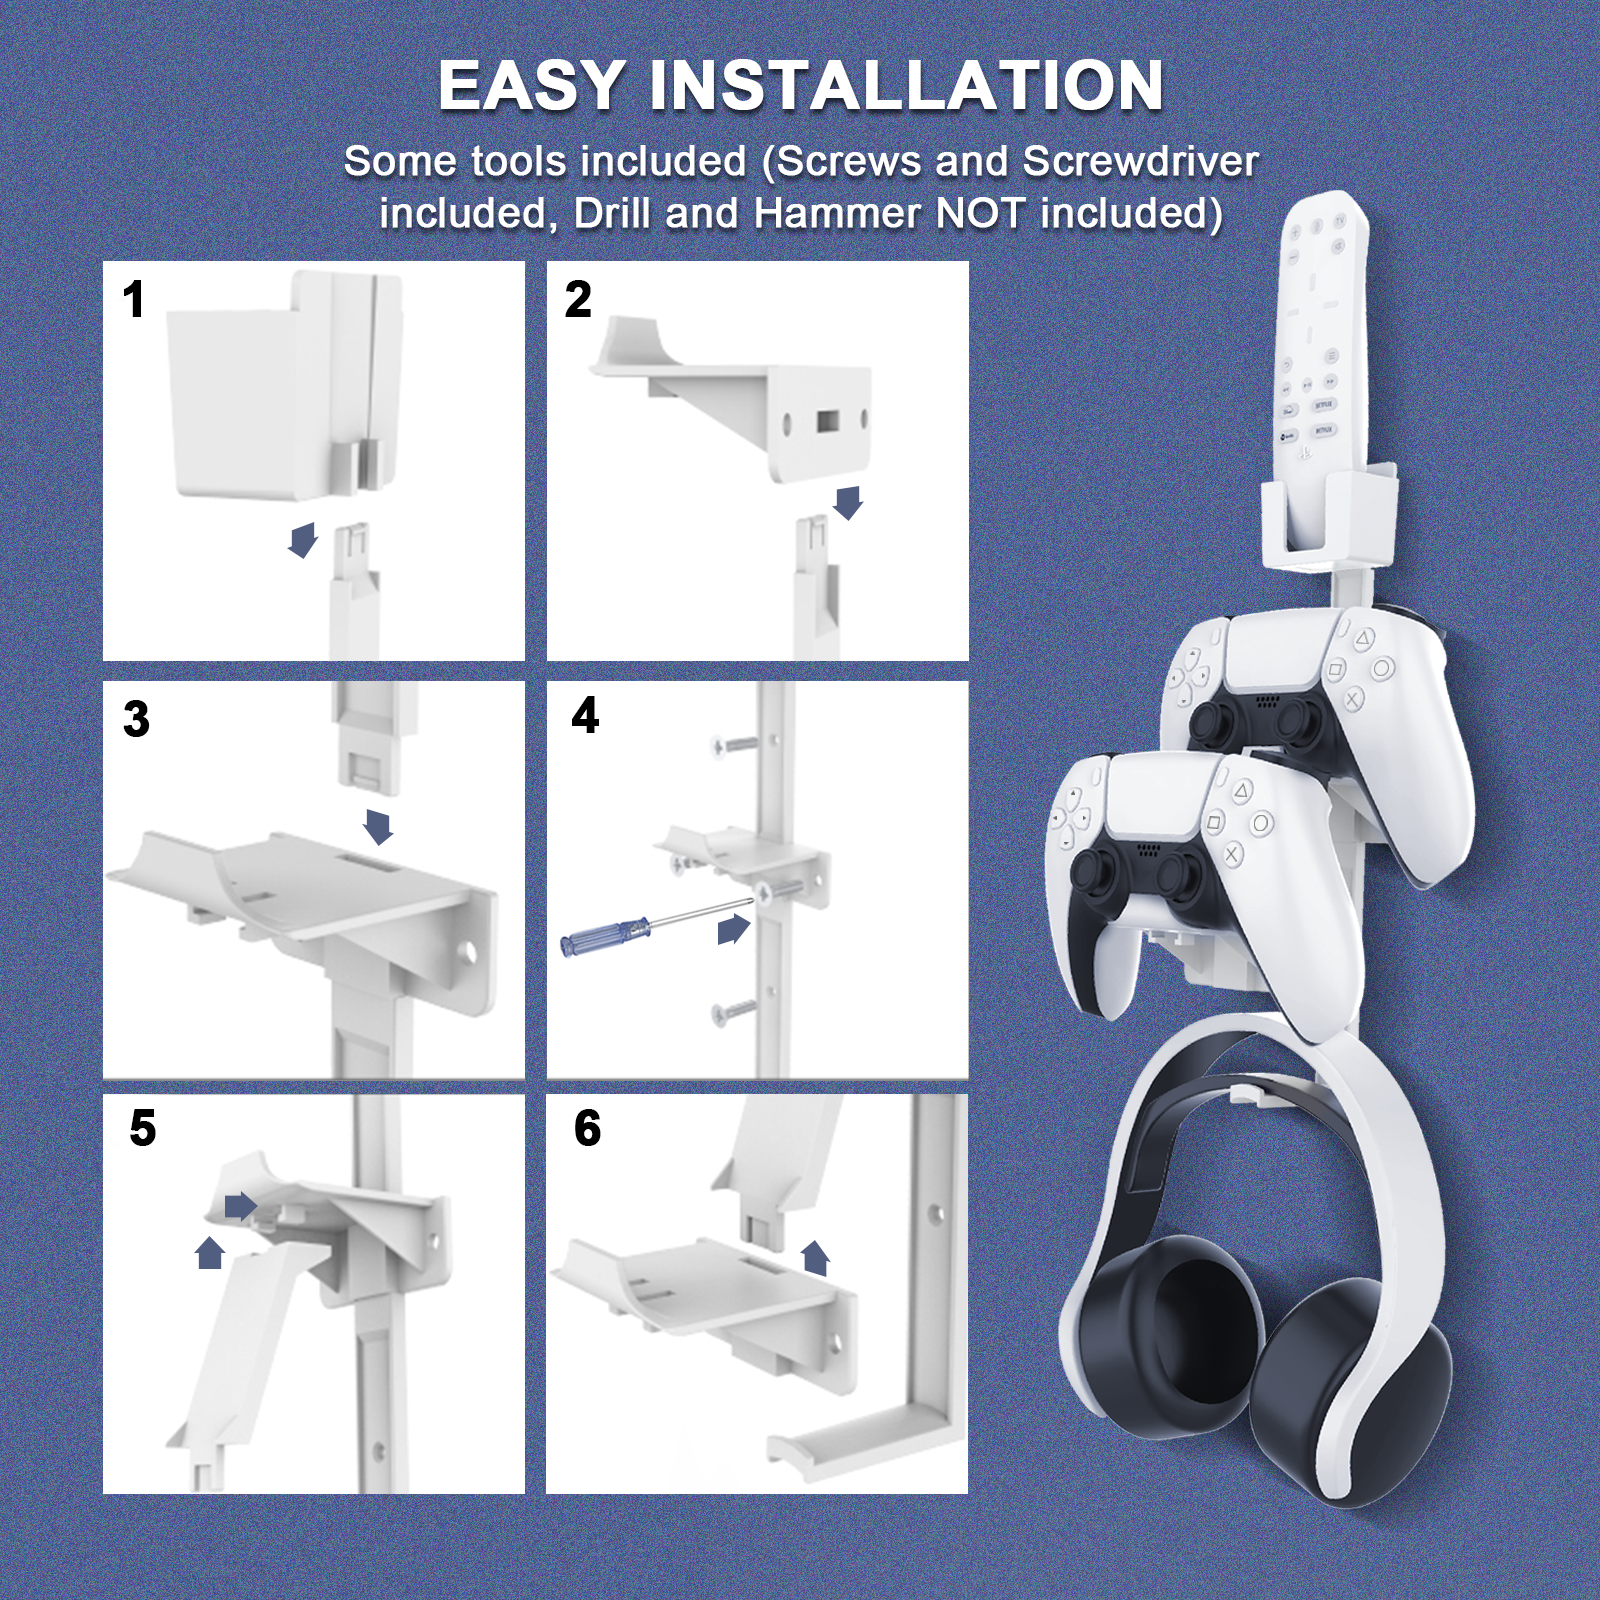 Step-by-step guide to install the multi-controller hanger.